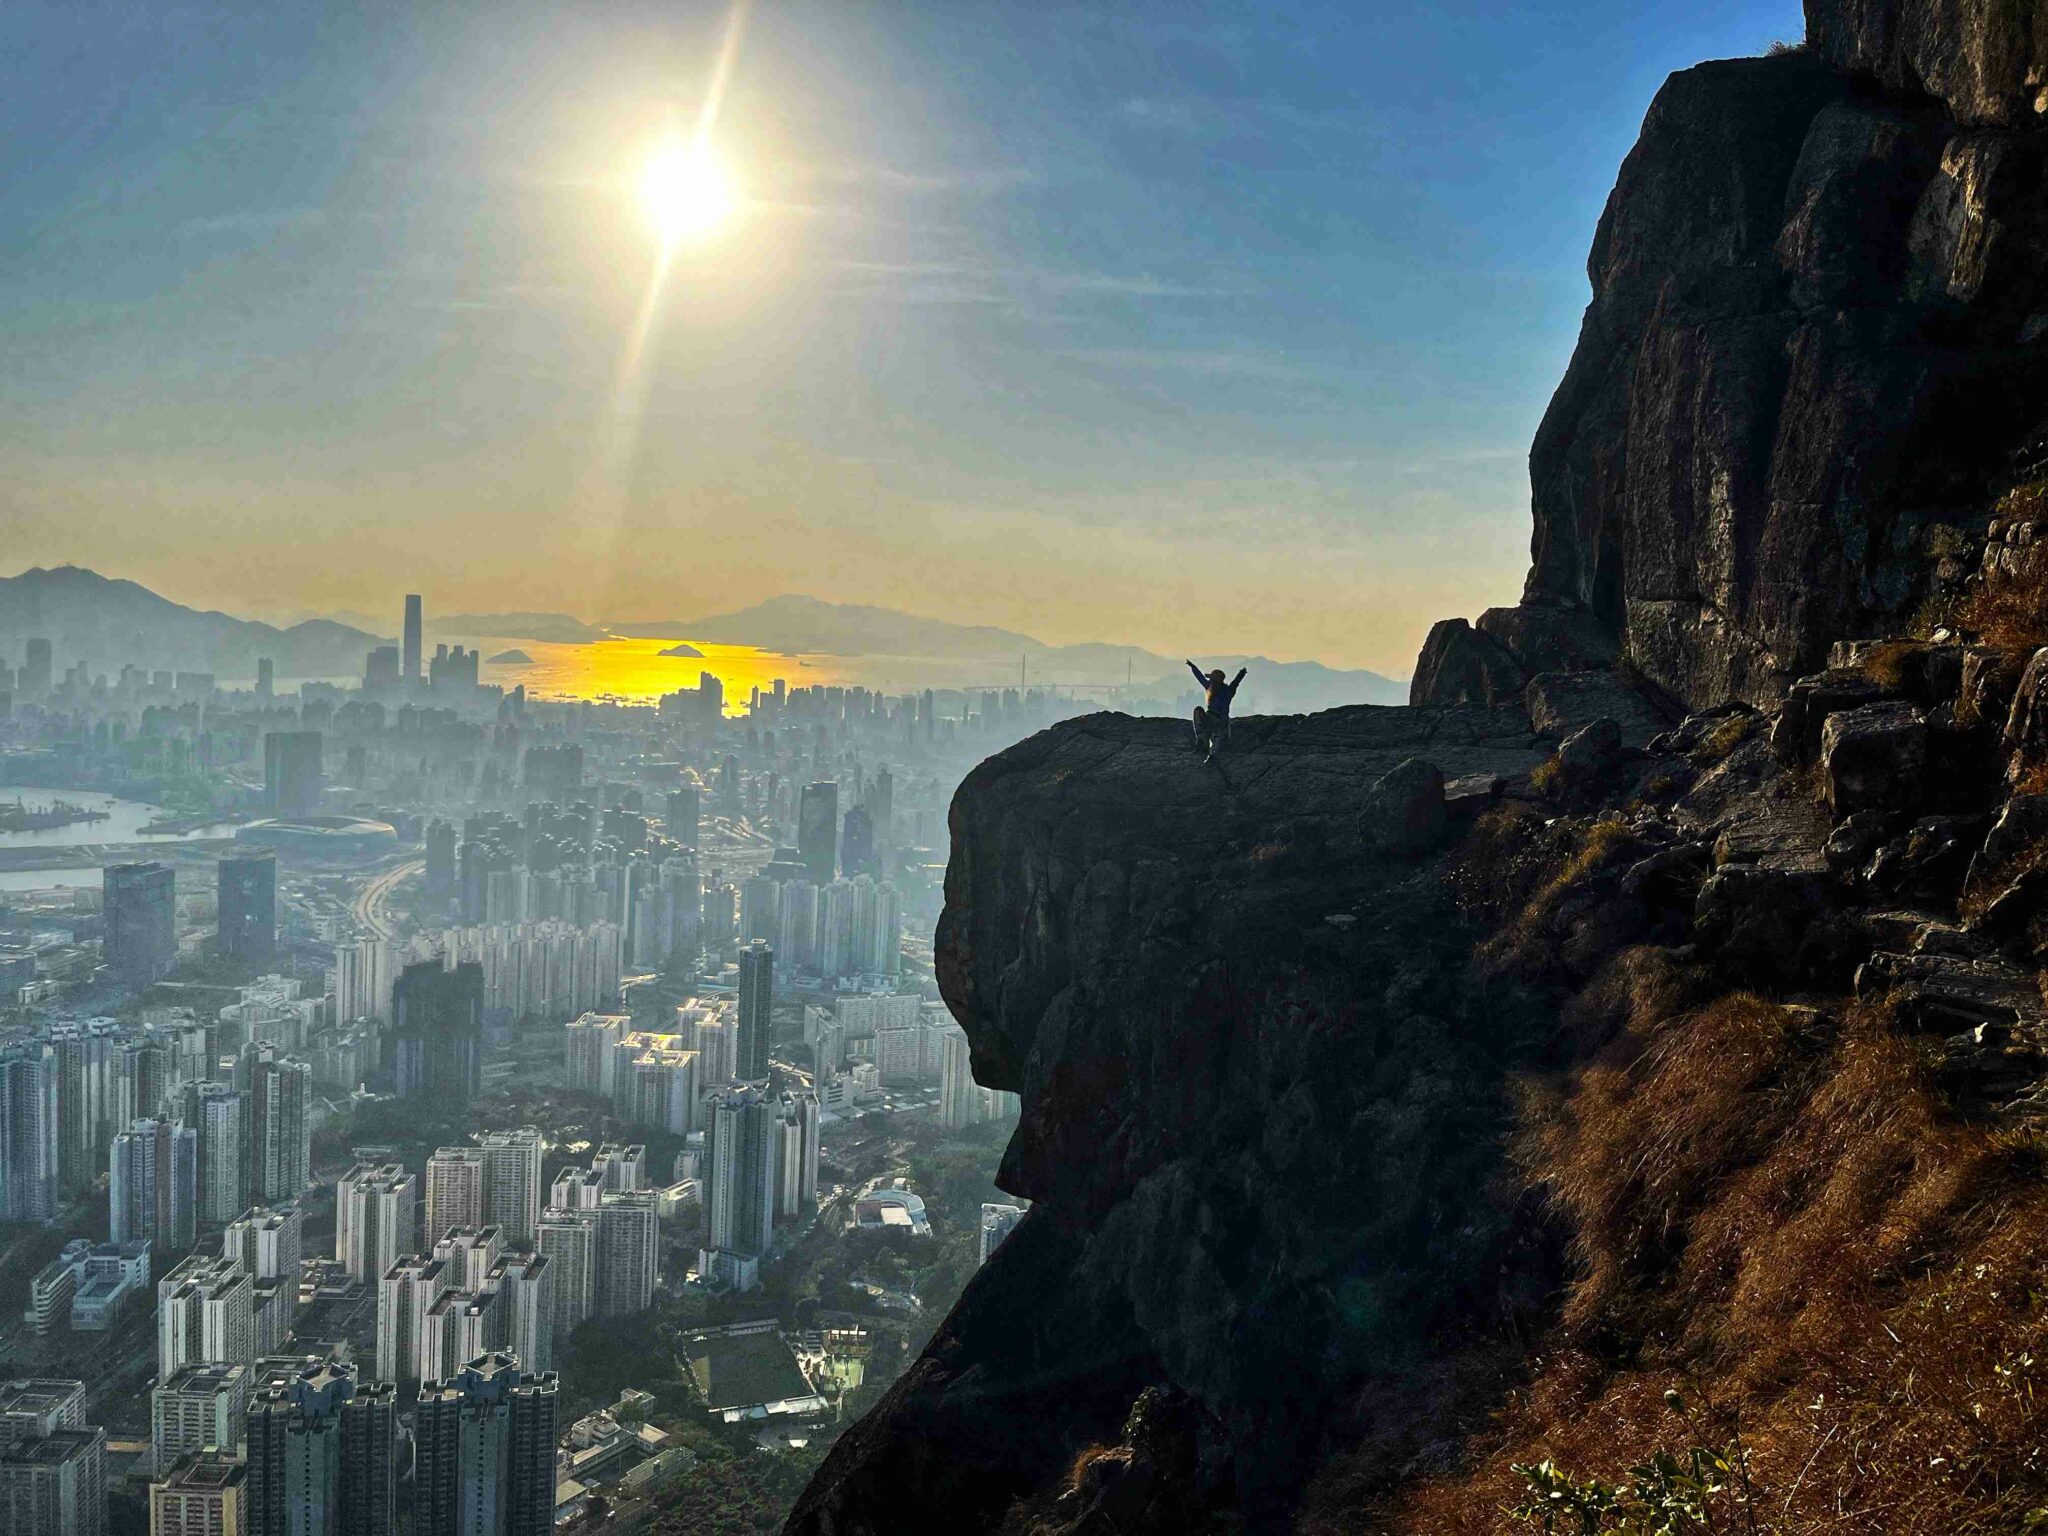 Scary trails – Hiking Kowloon Peak and Suicide Cliff over Hong Kong.